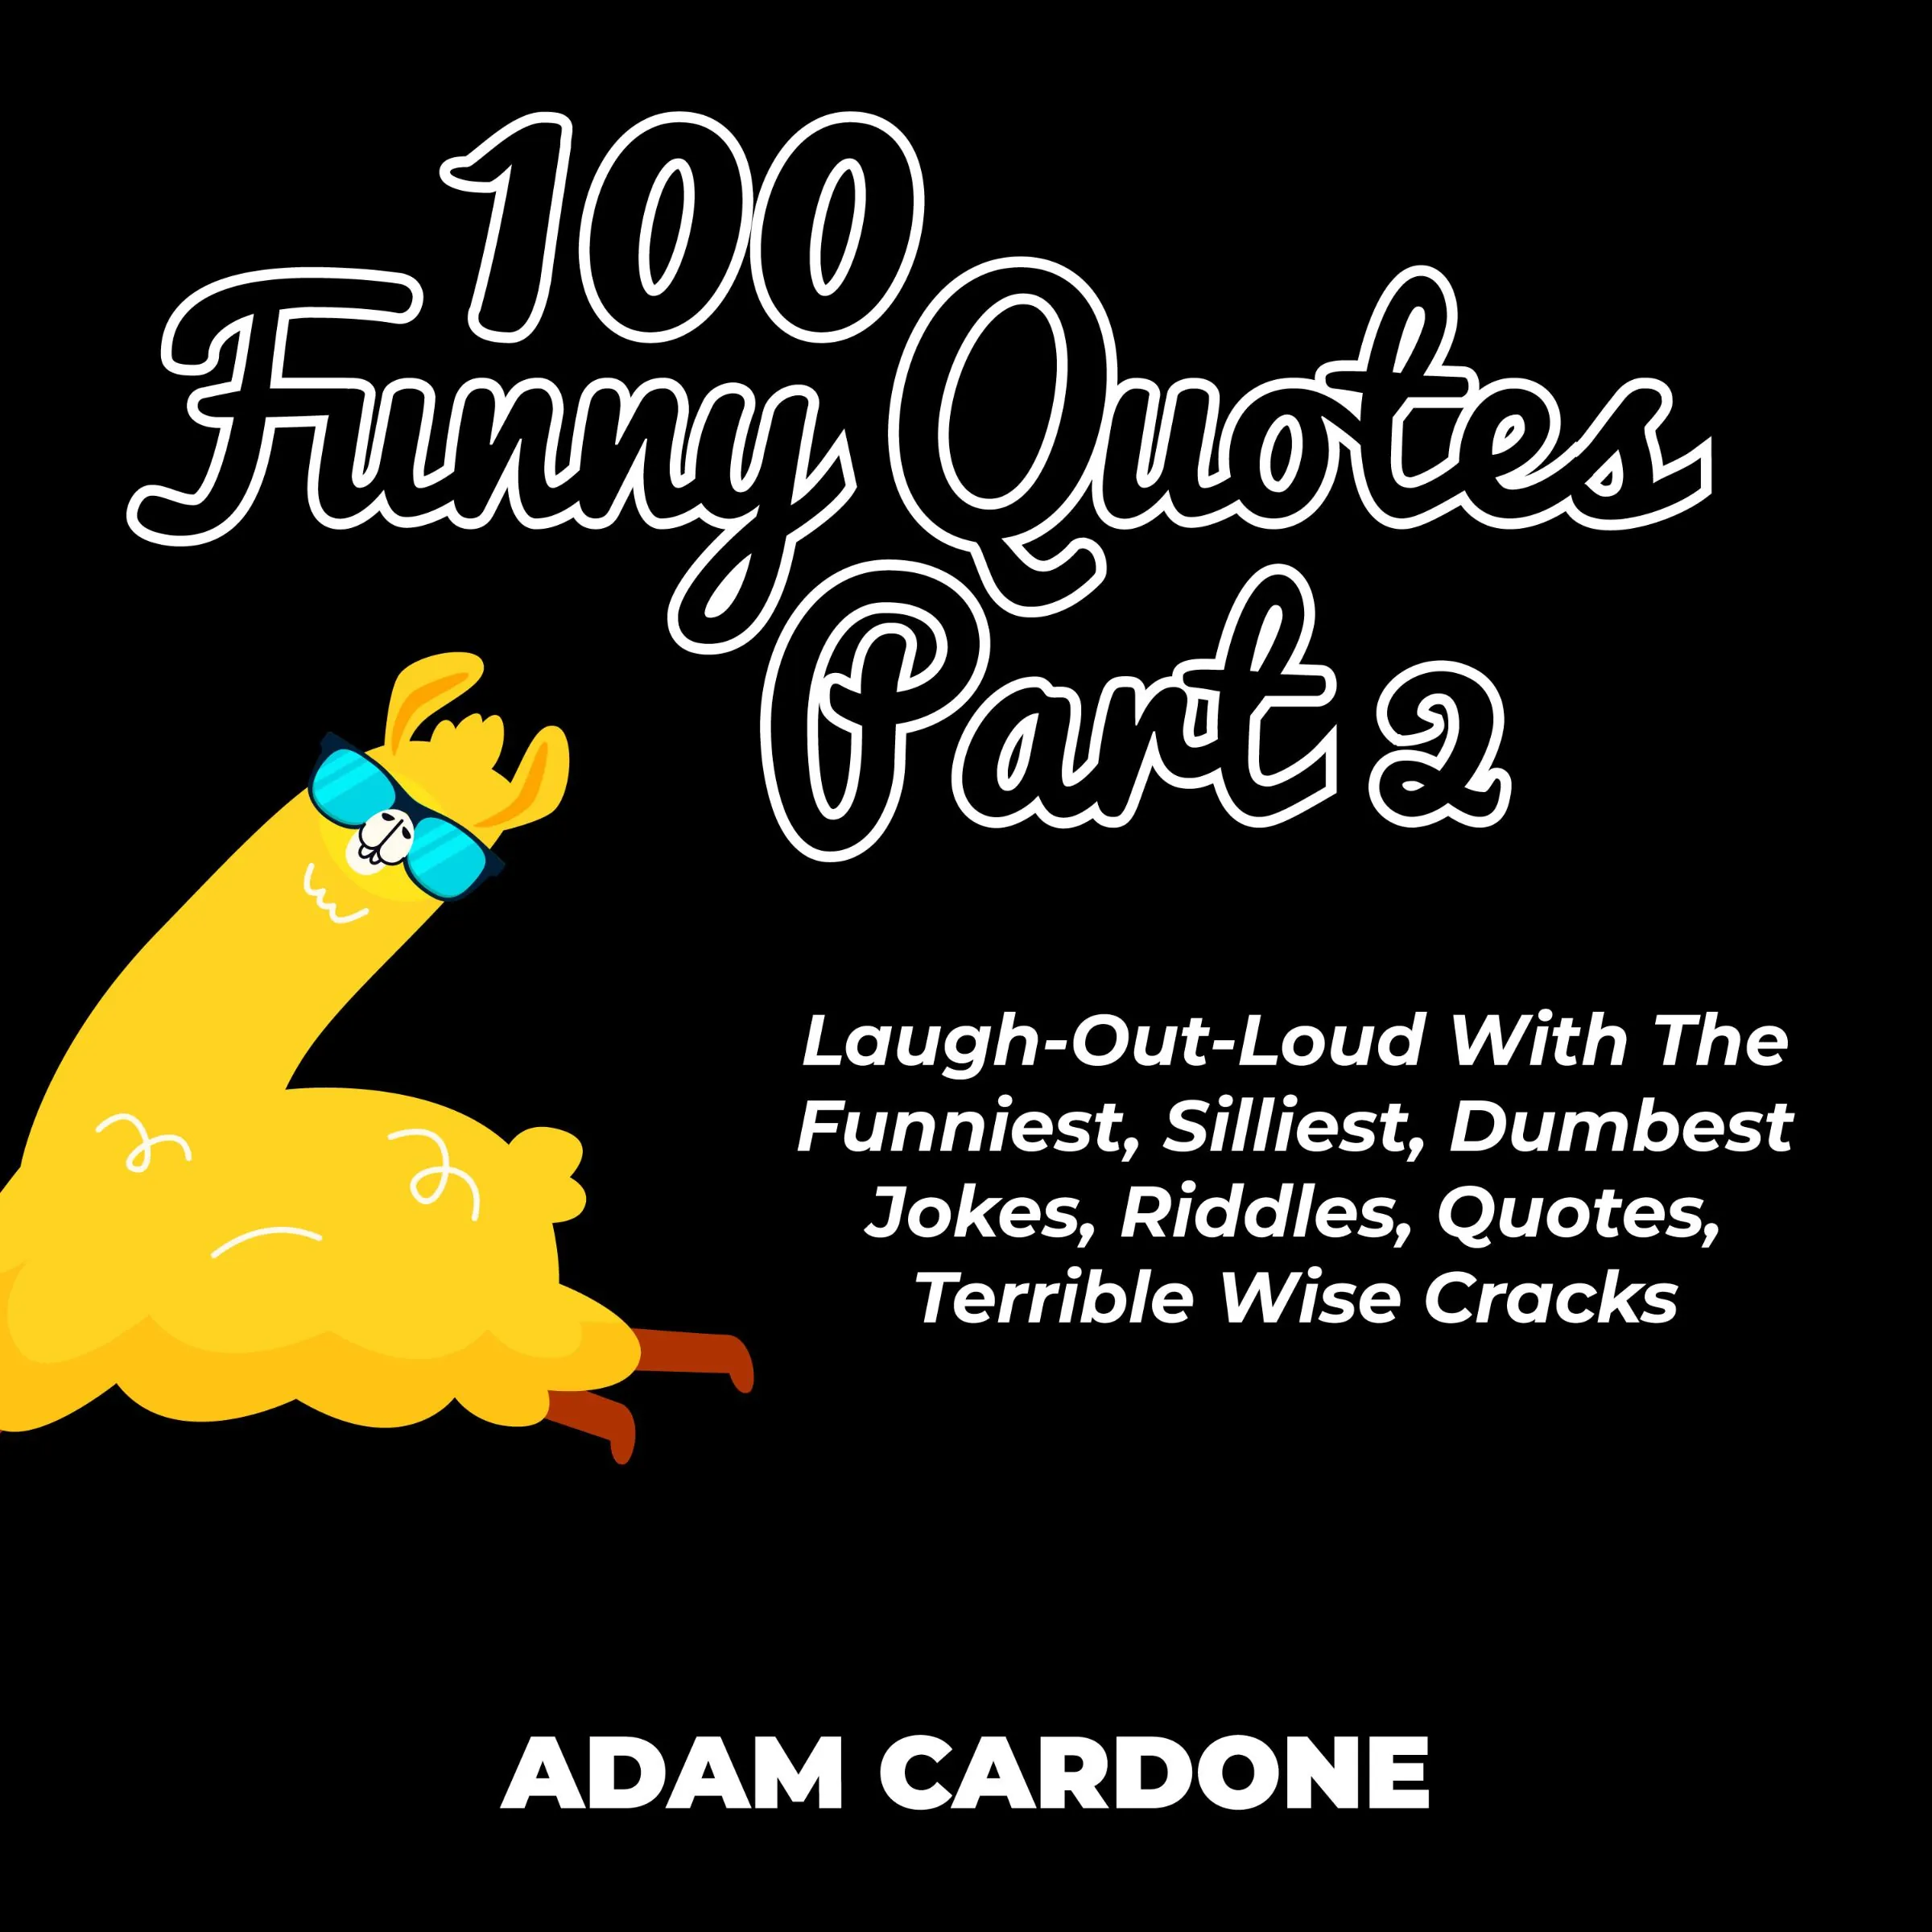 100 Funny Quotes Part 2: Laugh-Out-Loud With The Funniest, Silliest, Dumbest Jokes, Riddles, Quotes, Terrible Wise Cracks Audiobook by Adam Cardone